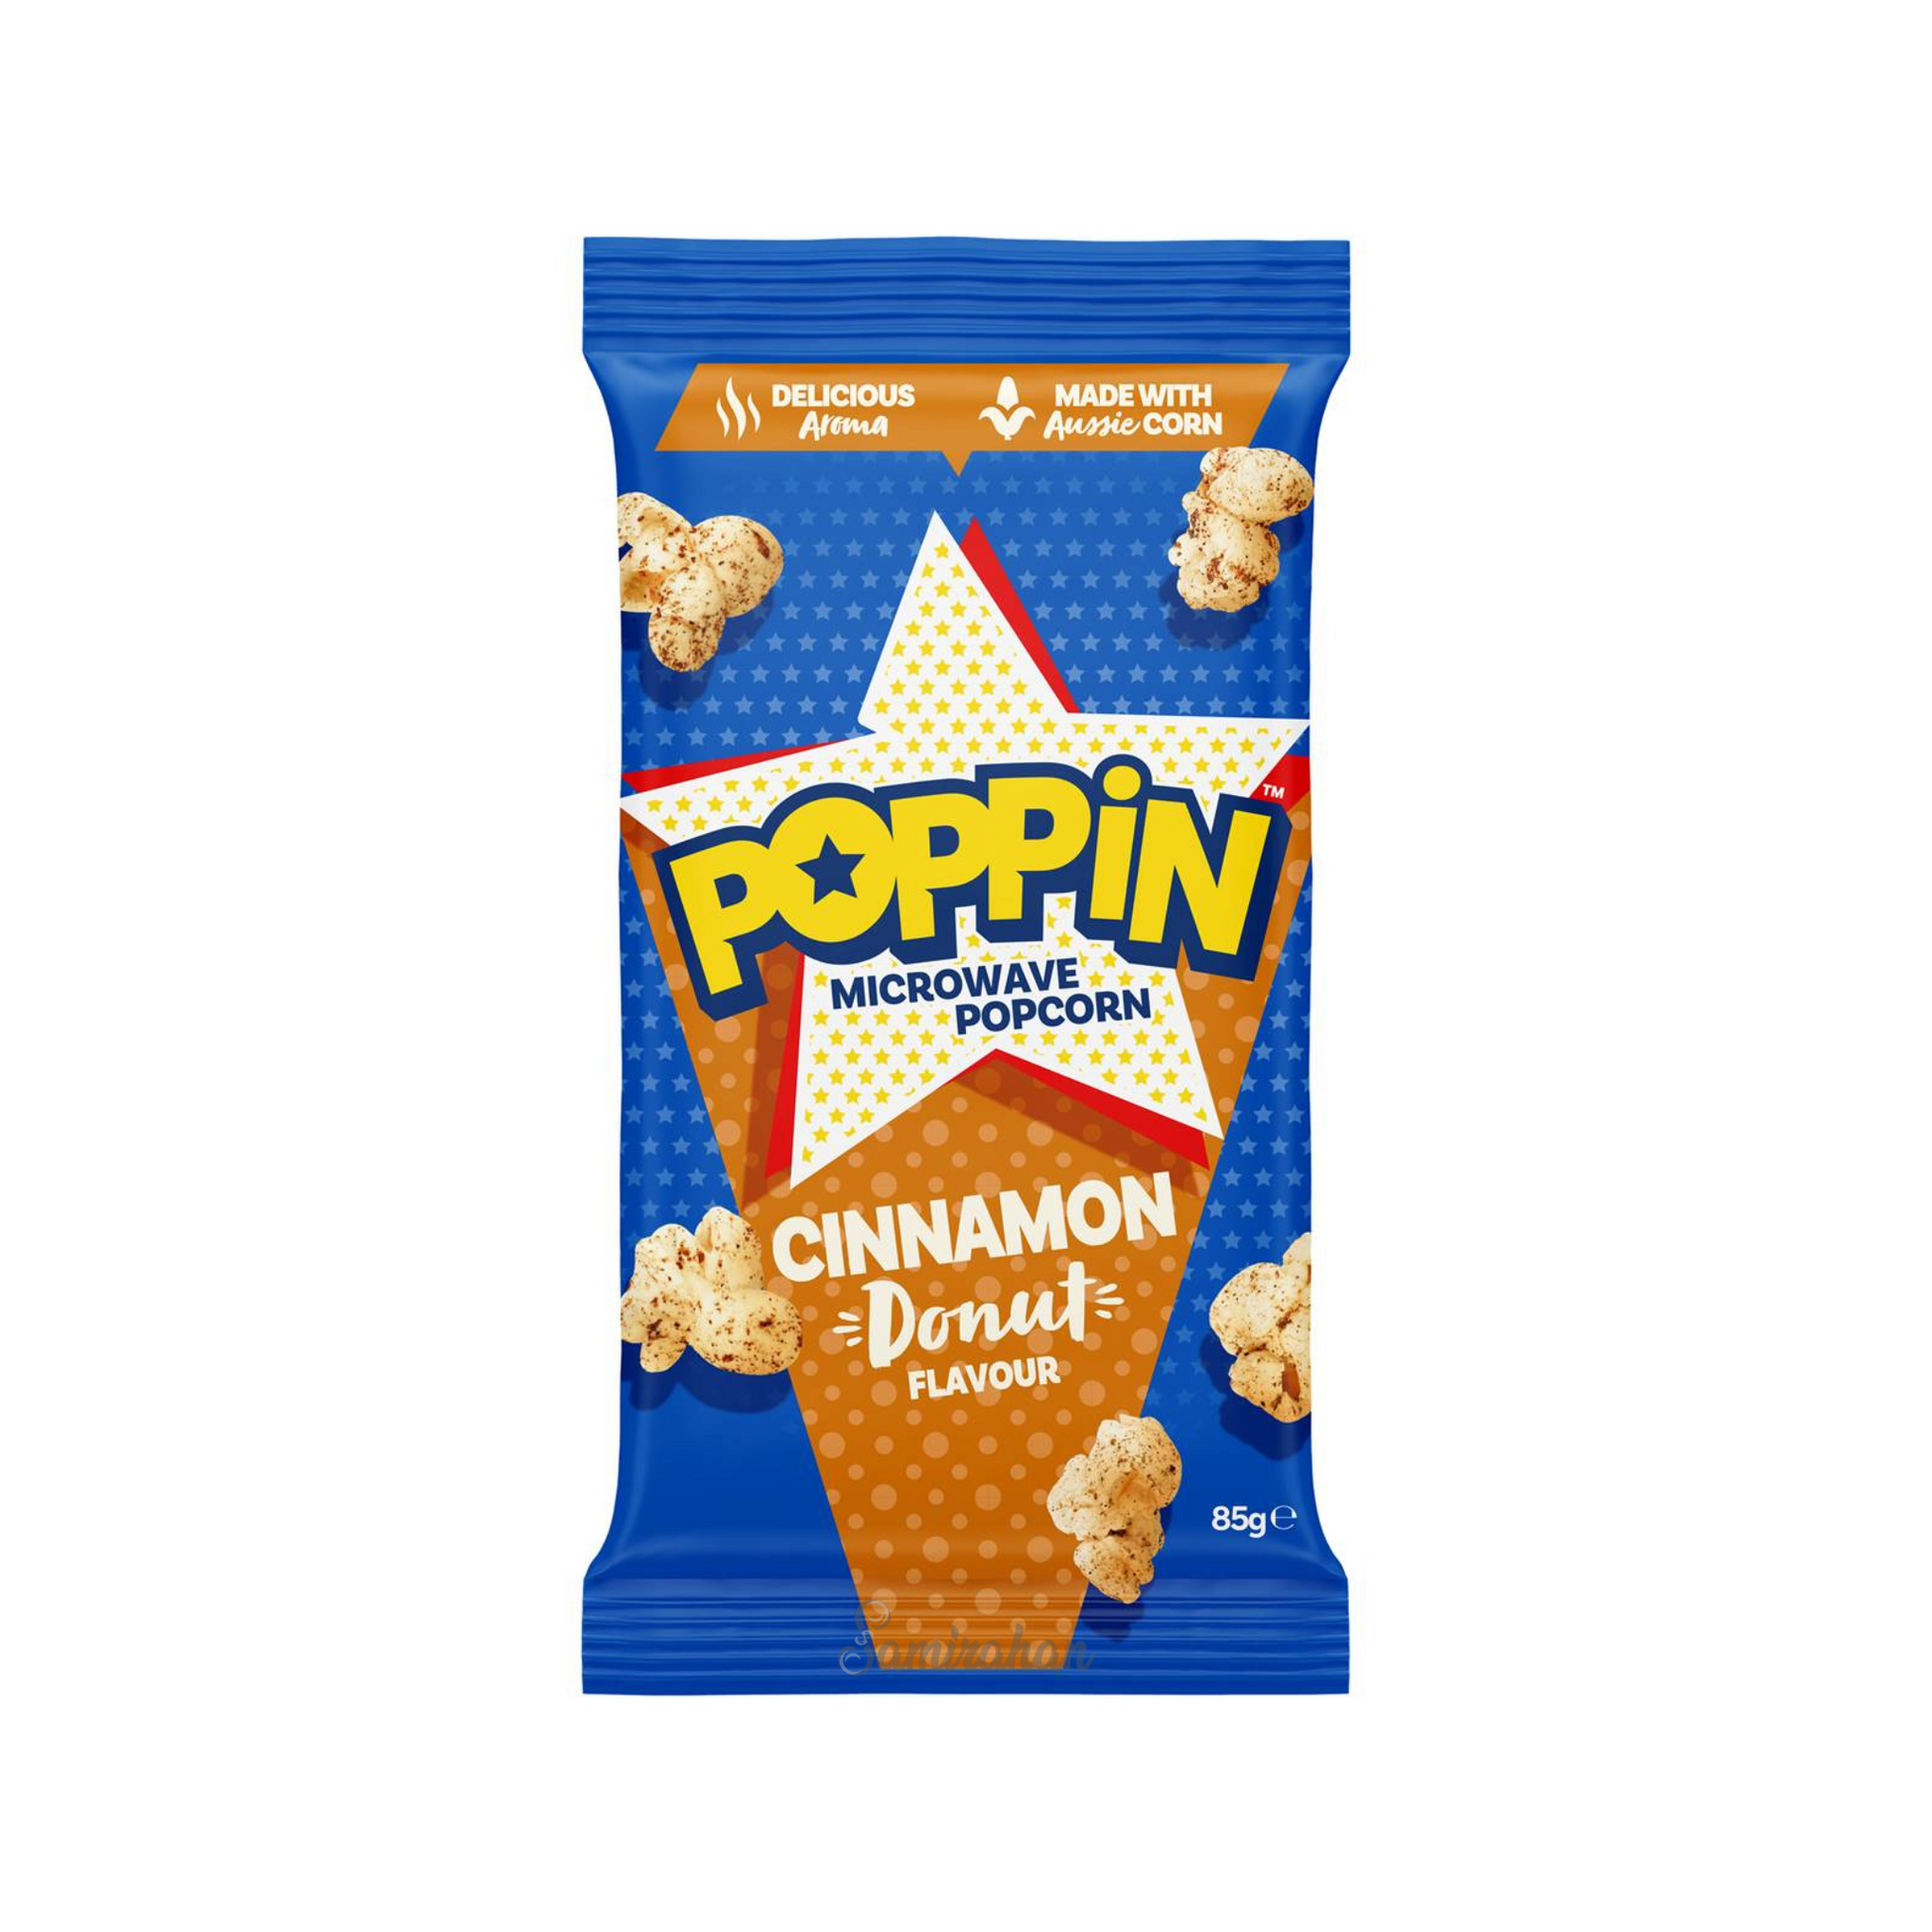 Poppin Cinnamon Donut Microwave Popcorn is made by combining Australian corn kernels with just the right amount of buttery flavour. Ready in just a few minutes, it is a tasty snack to share with family & friends. Best imported foreign Aussie genuine authentic real food healthy premium quality price in Dhaka Bangladesh.